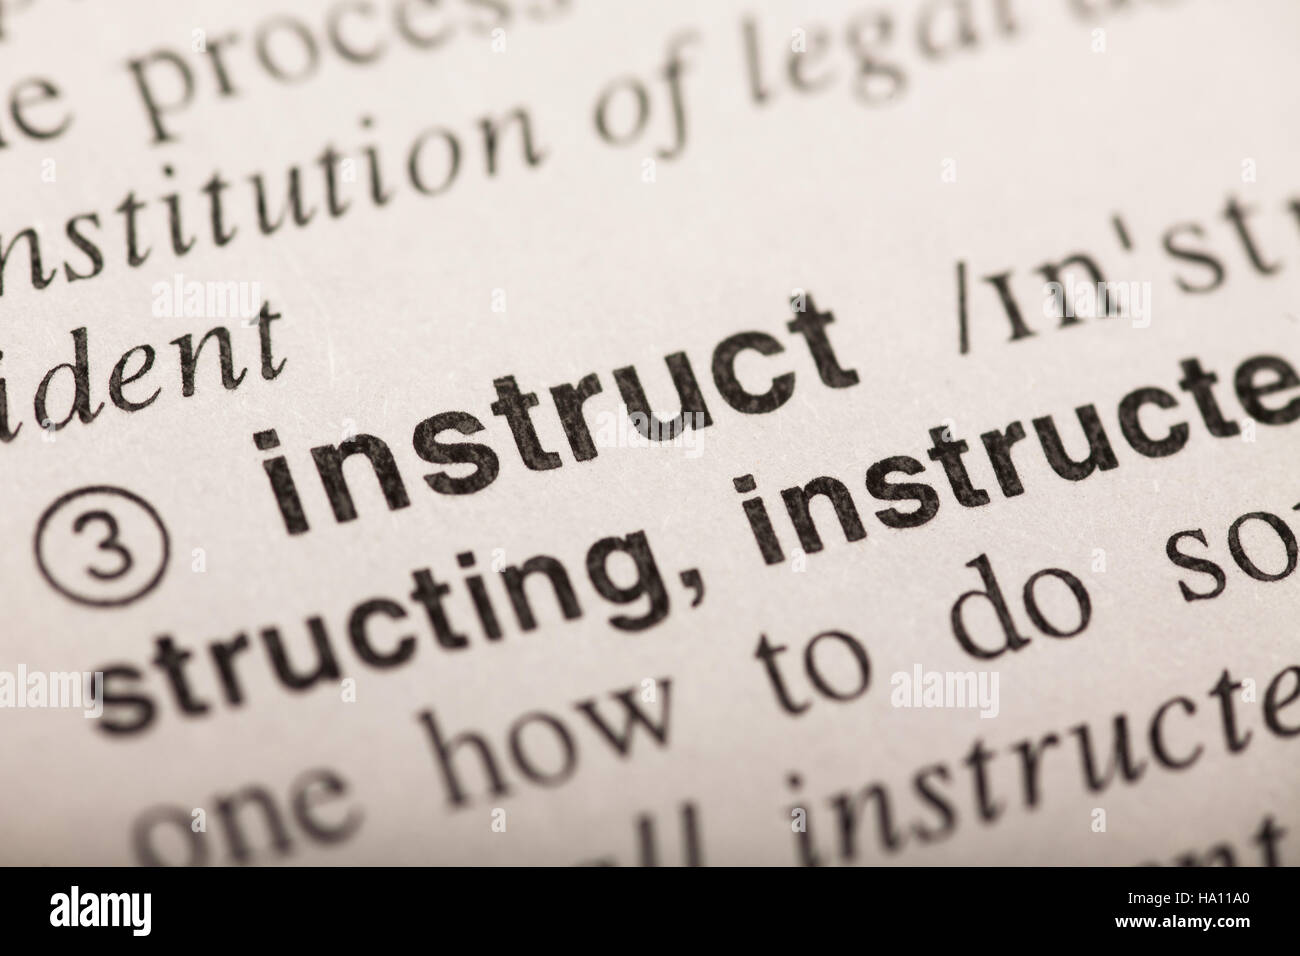 instruct - word in dictionary Stock Photo